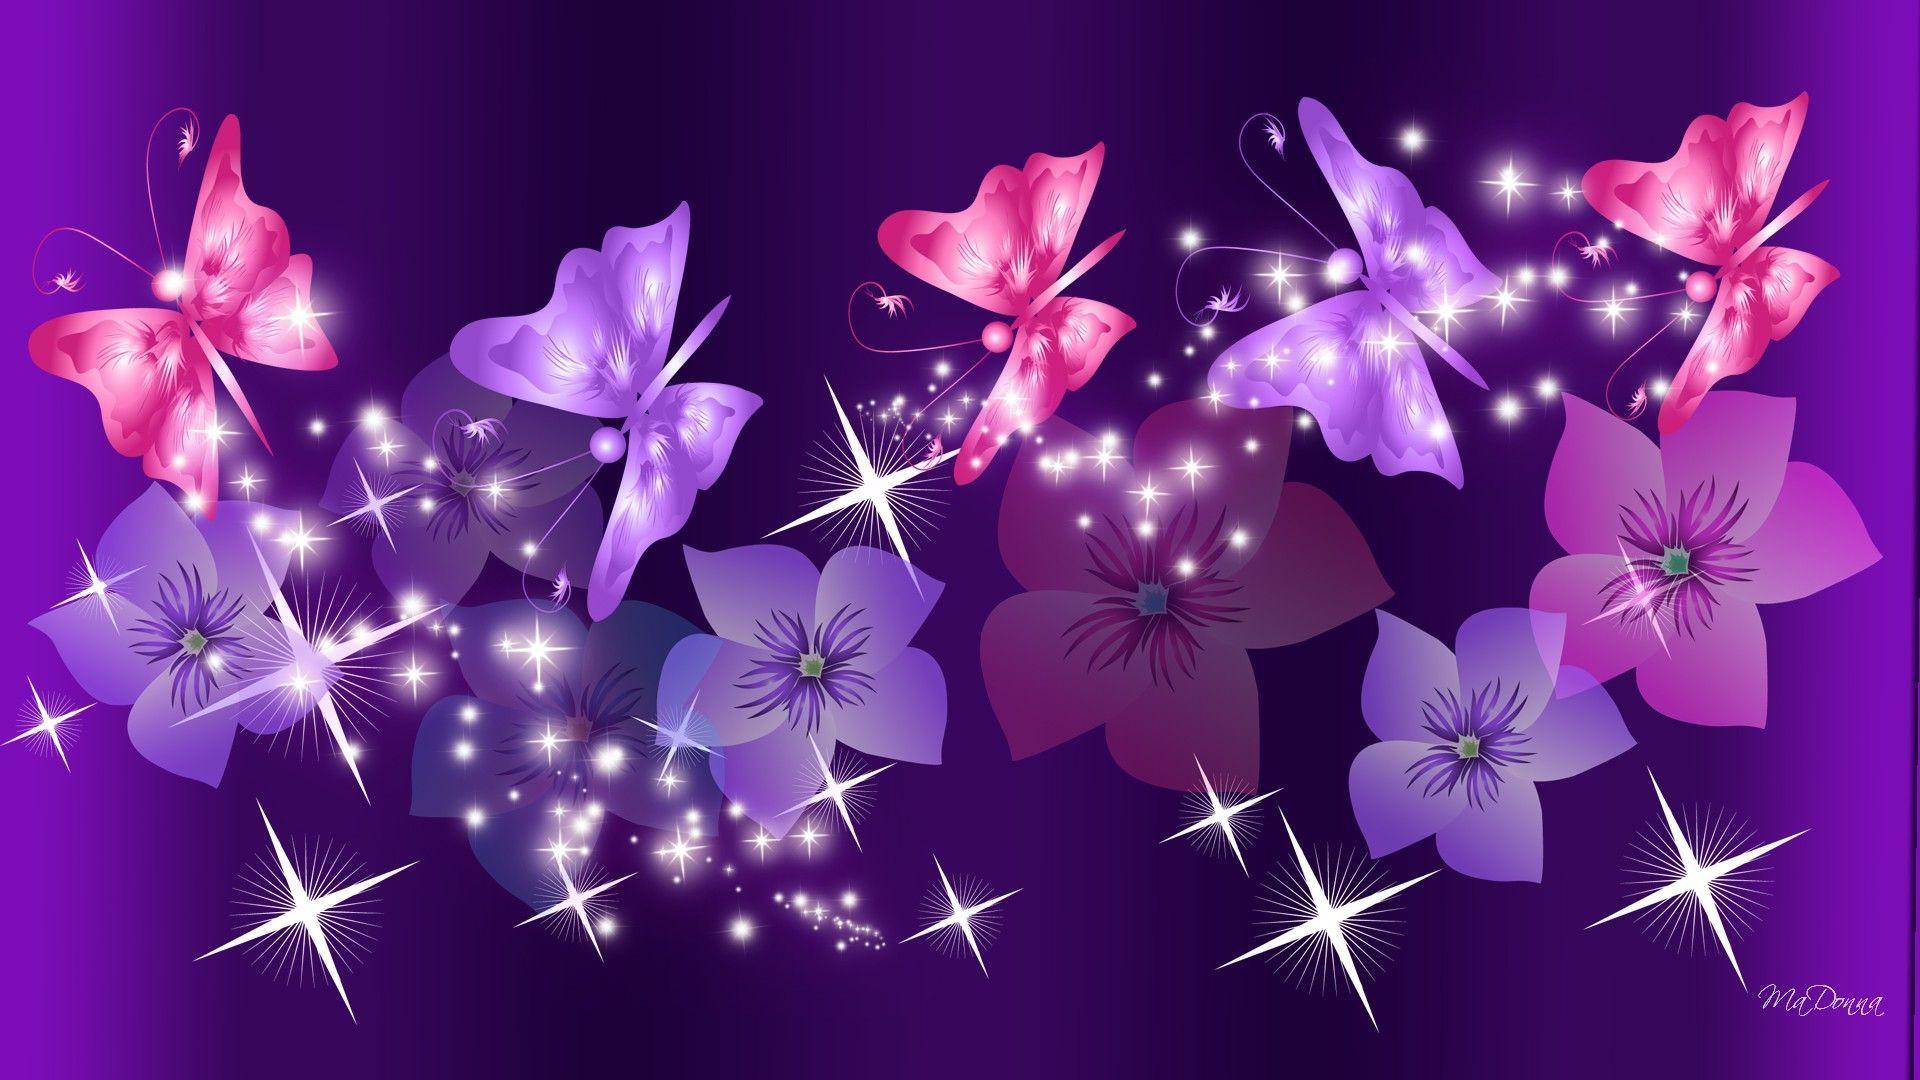 Wallpaper For > Cool Purple And Pink Wallpaper